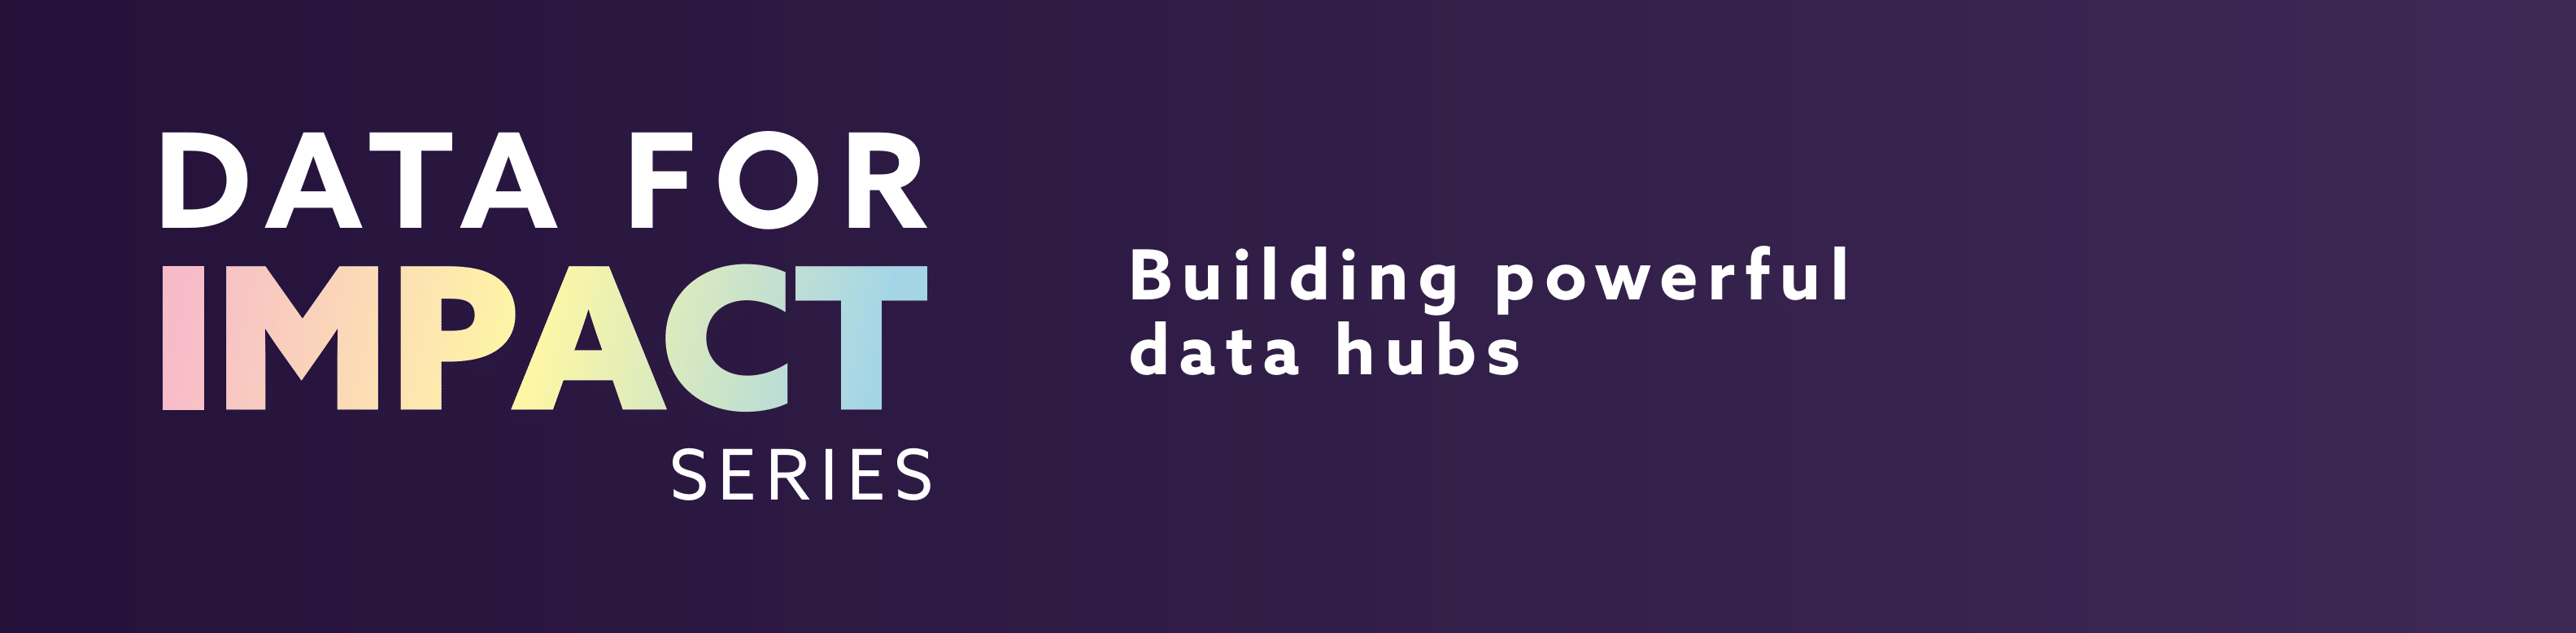 Data for Impact Series: Building Powerful Data Hubs